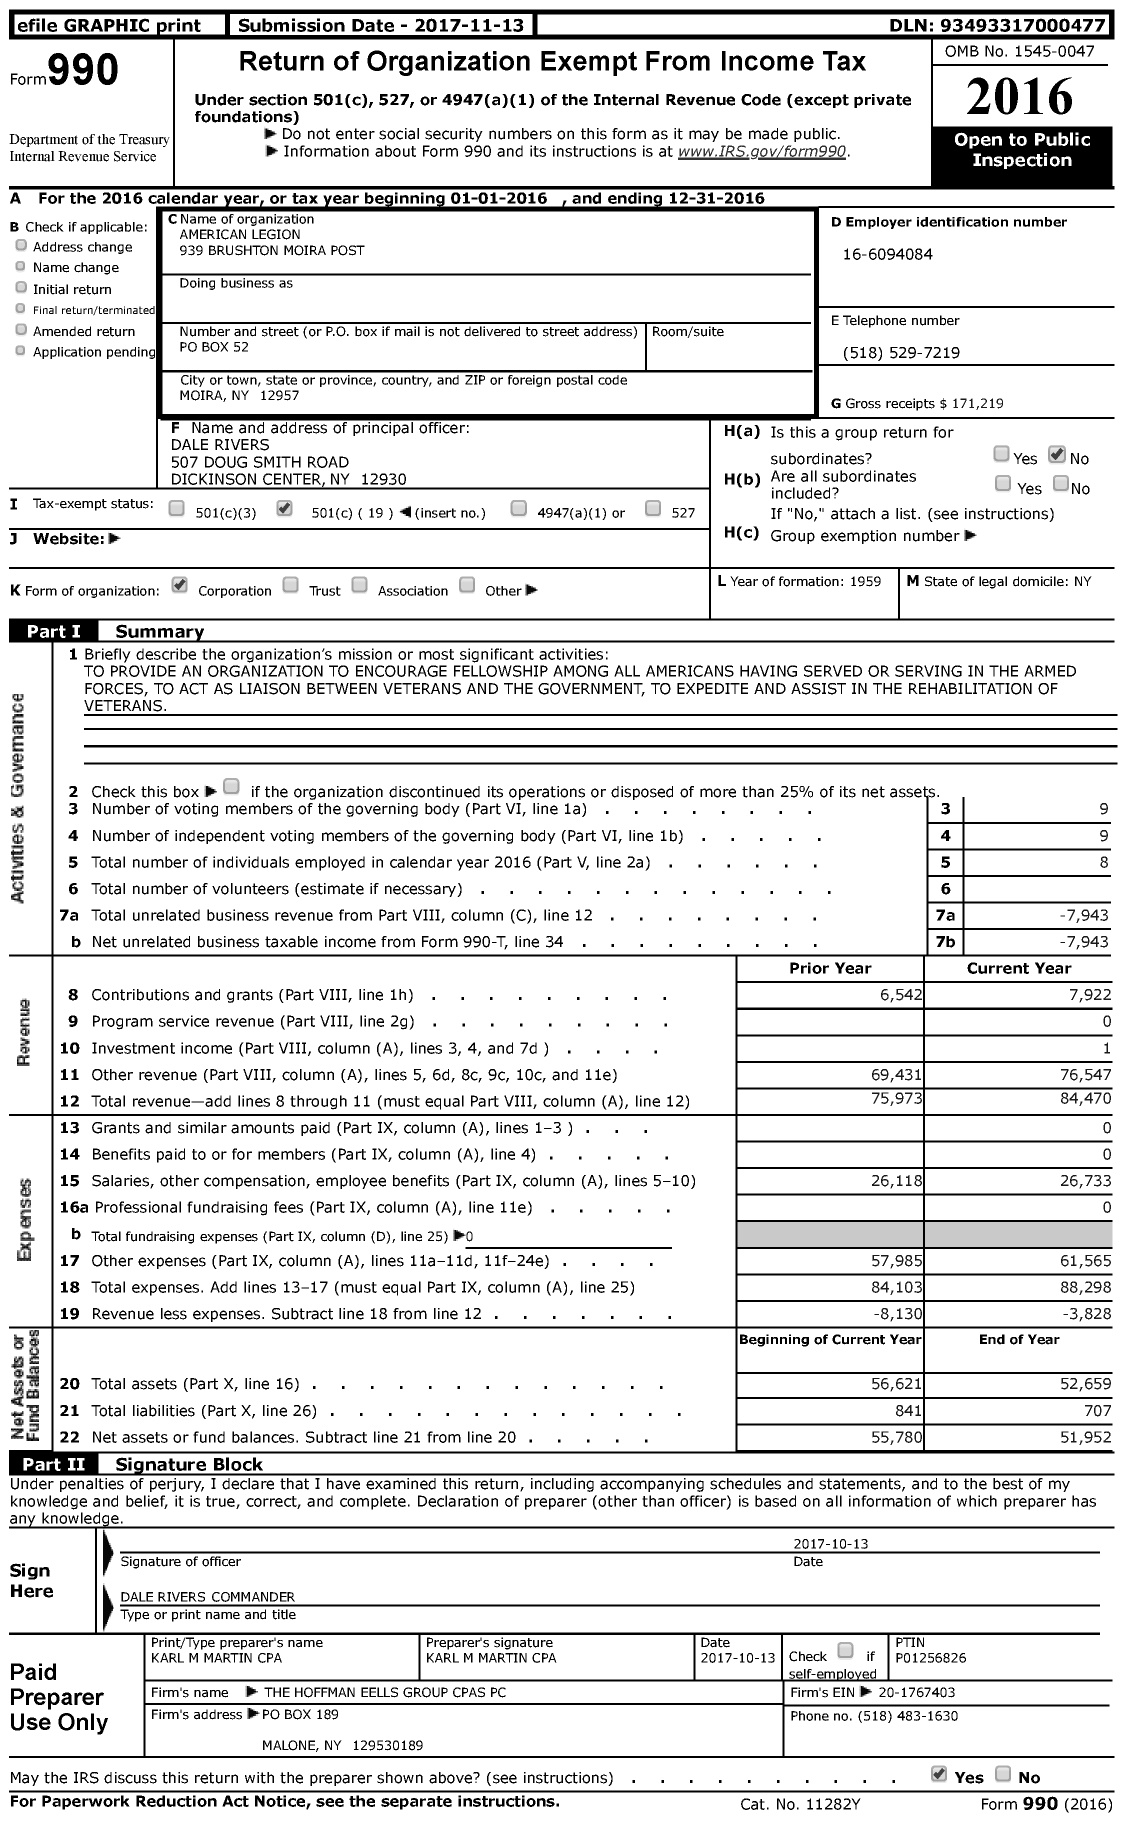 Image of first page of 2016 Form 990 for American Legion 939 Brushton Moira Post